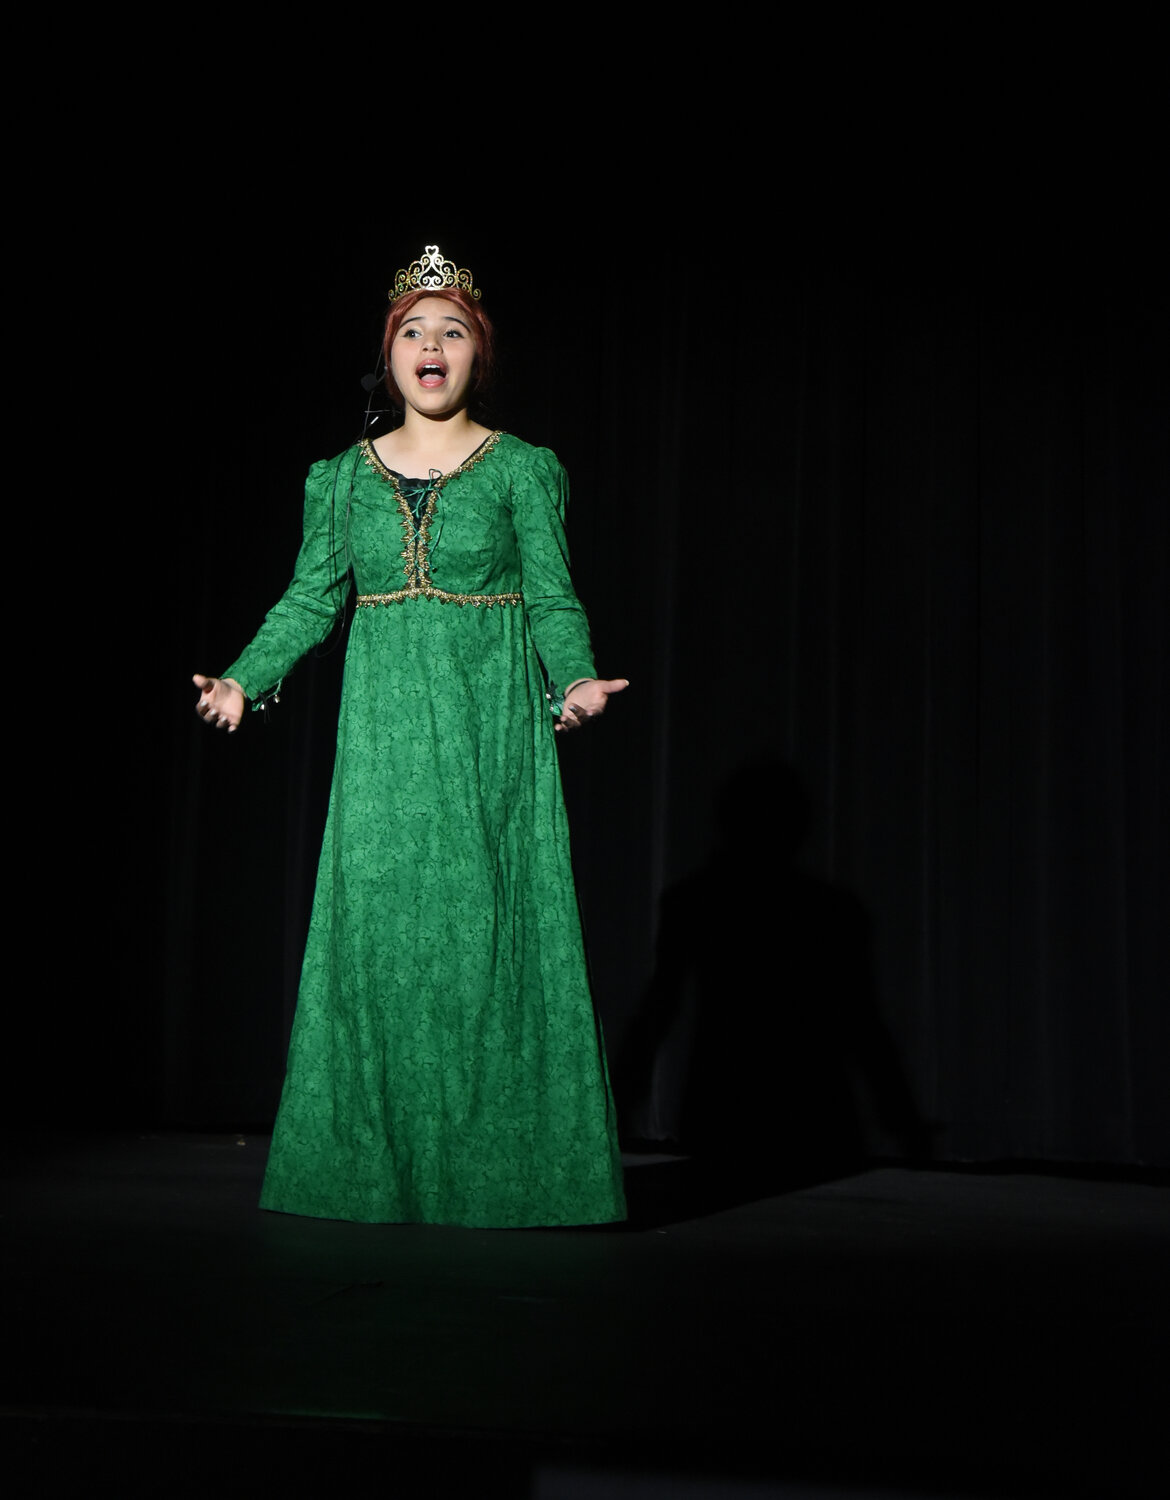 Liana Garza portrayed Adult Fiona in Frederick Middle School’s production of Shrek the Musical, Jr. and proved she can handle big roles. Her acting and singing lit up the stage.